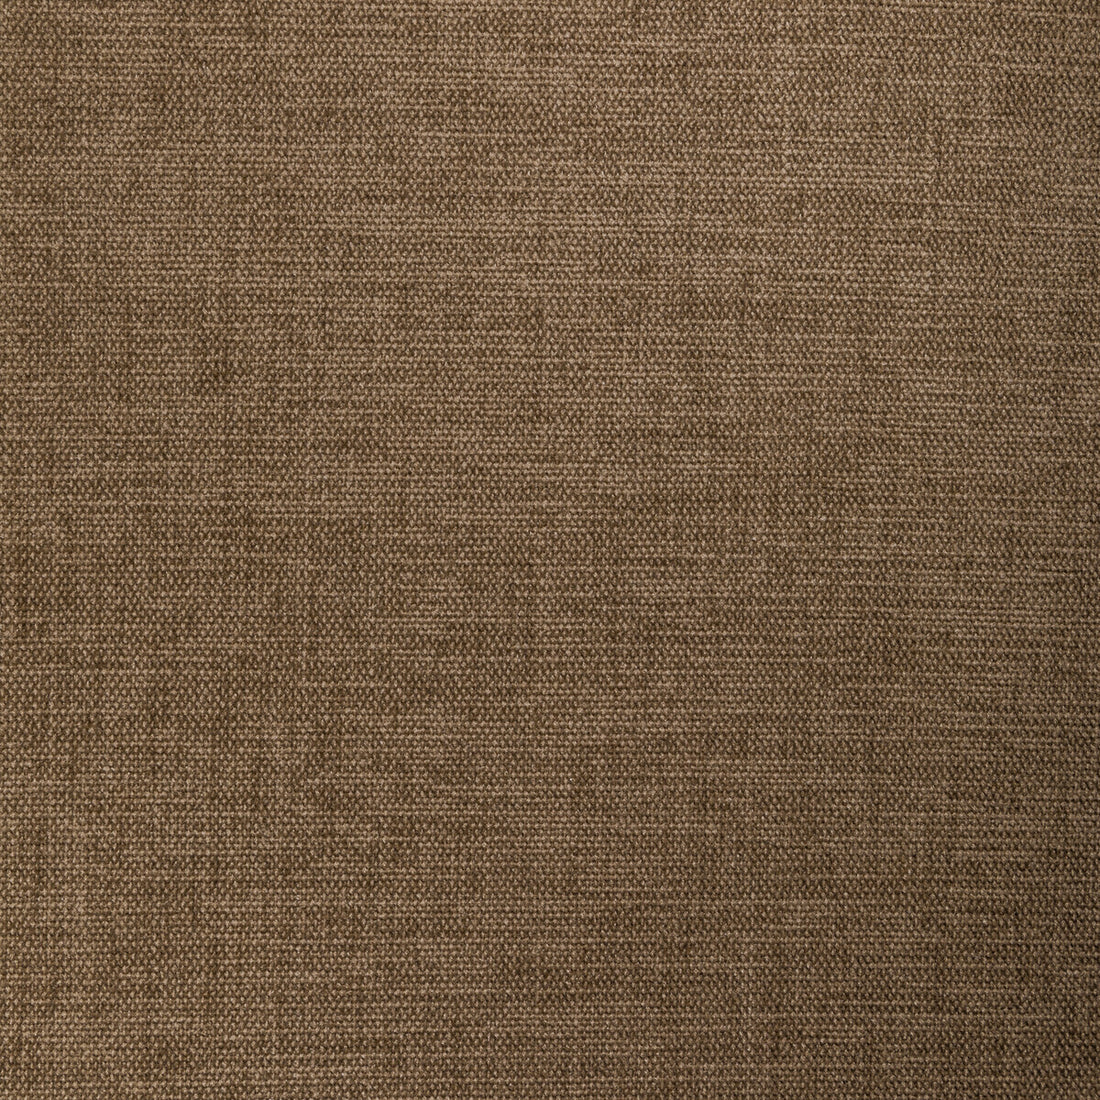 Kravet Contract fabric in 34961-1060 color - pattern 34961.1060.0 - by Kravet Contract in the Performance Kravetarmor collection